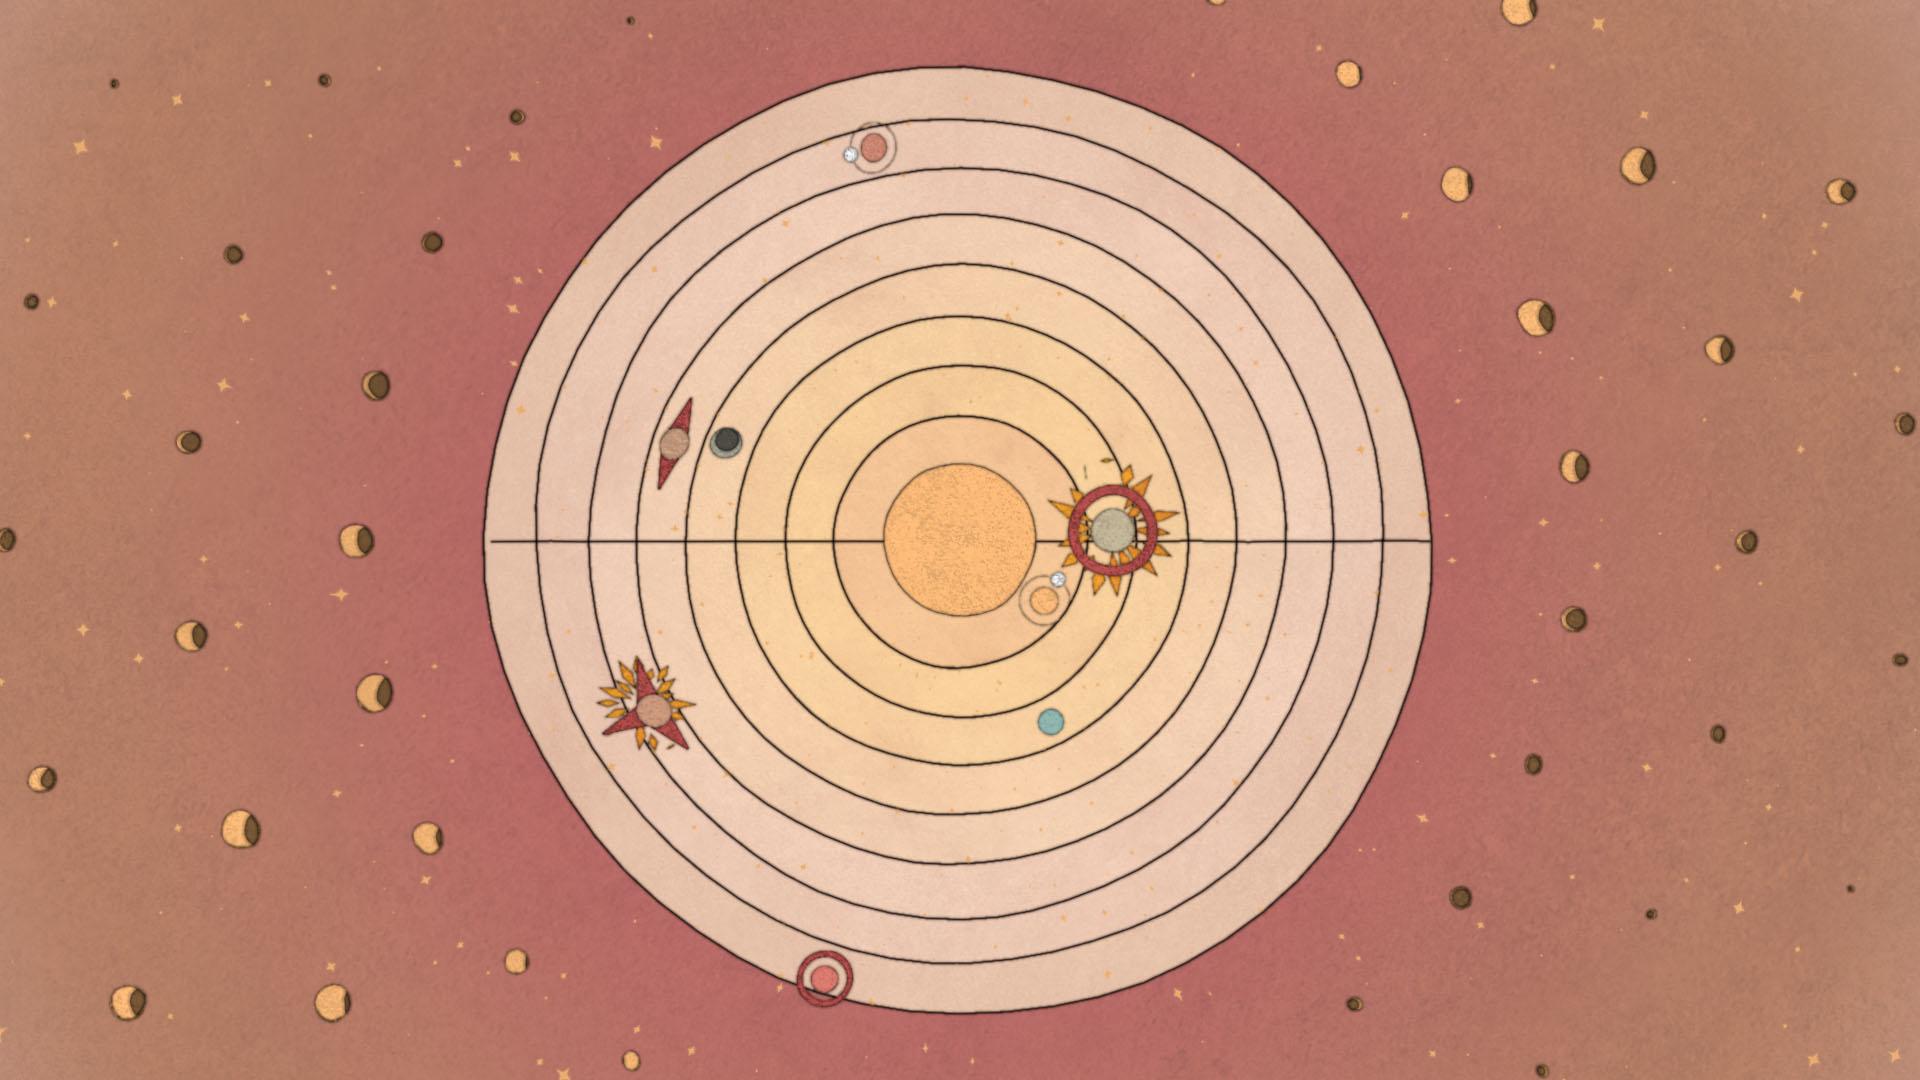 A medieval-style illustration of eight planets in orbit around a sun, surrounded by a red sky dotted with many small moons